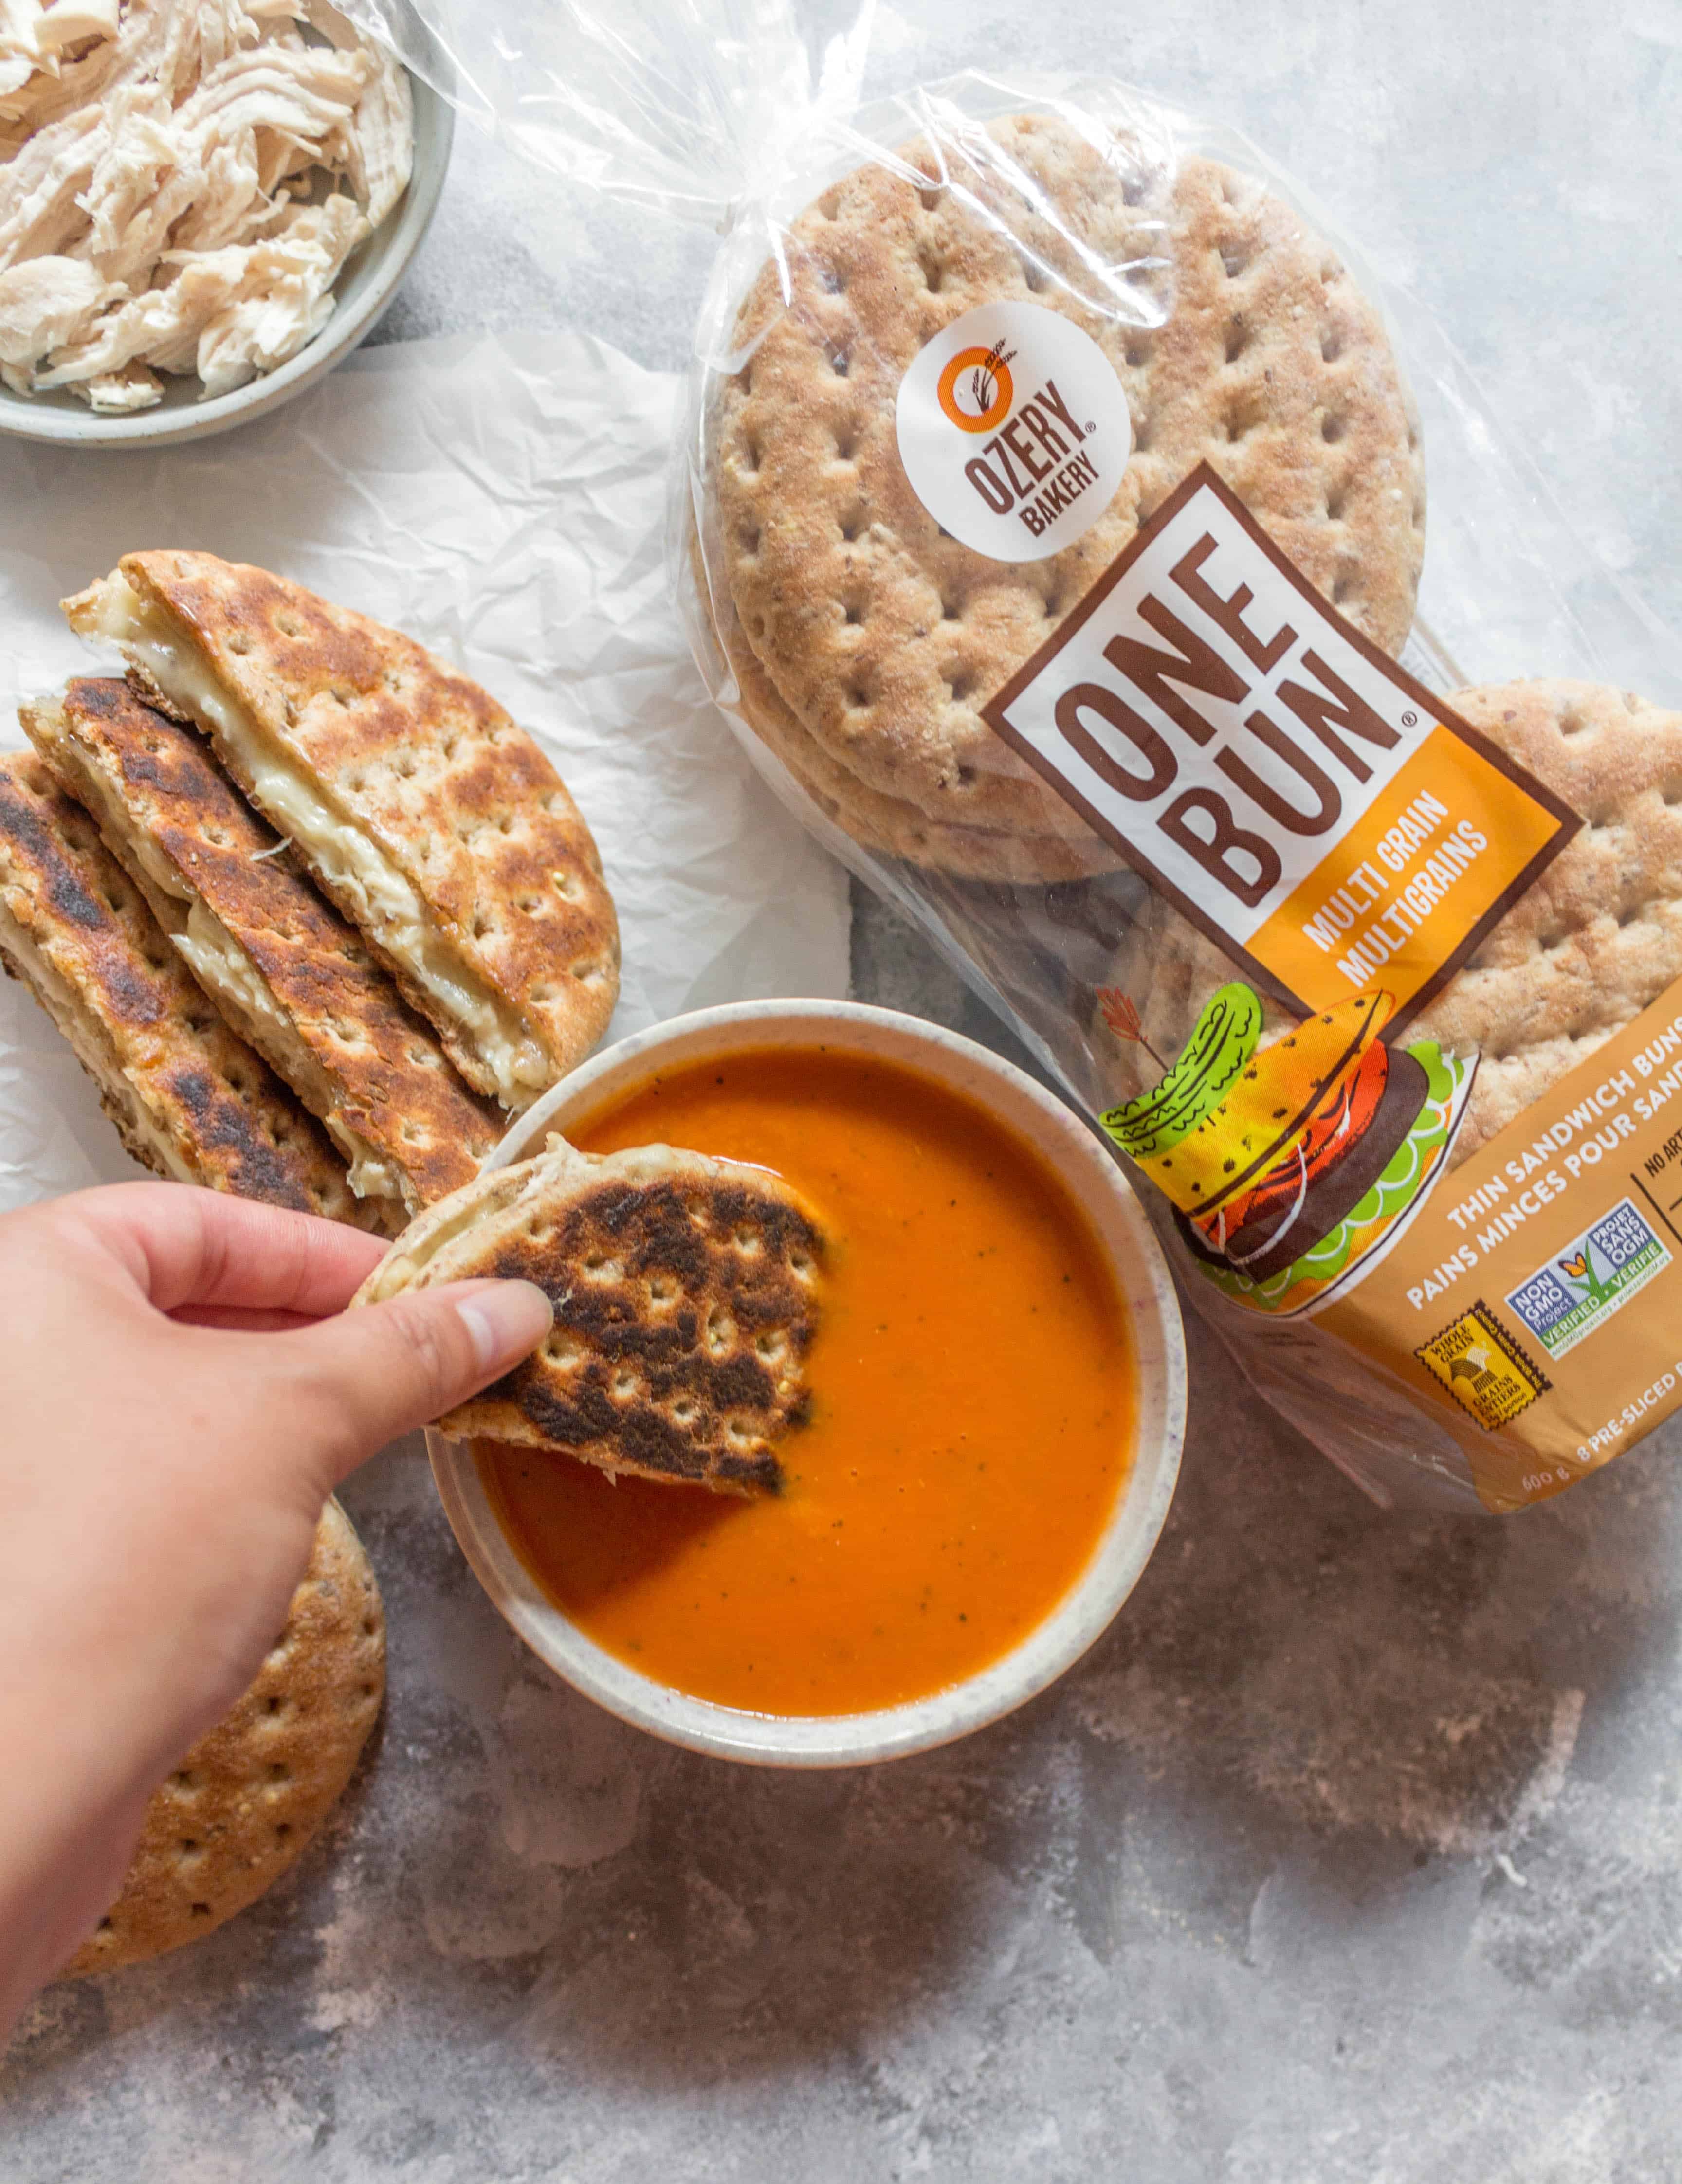 Who's ready for back to school season? Get those lunch boxes ready for the best grilled cheese sandwich featuring OneBun. Double the cheese with a hit of protein, this really is the best grilled cheese you can have for lunch!